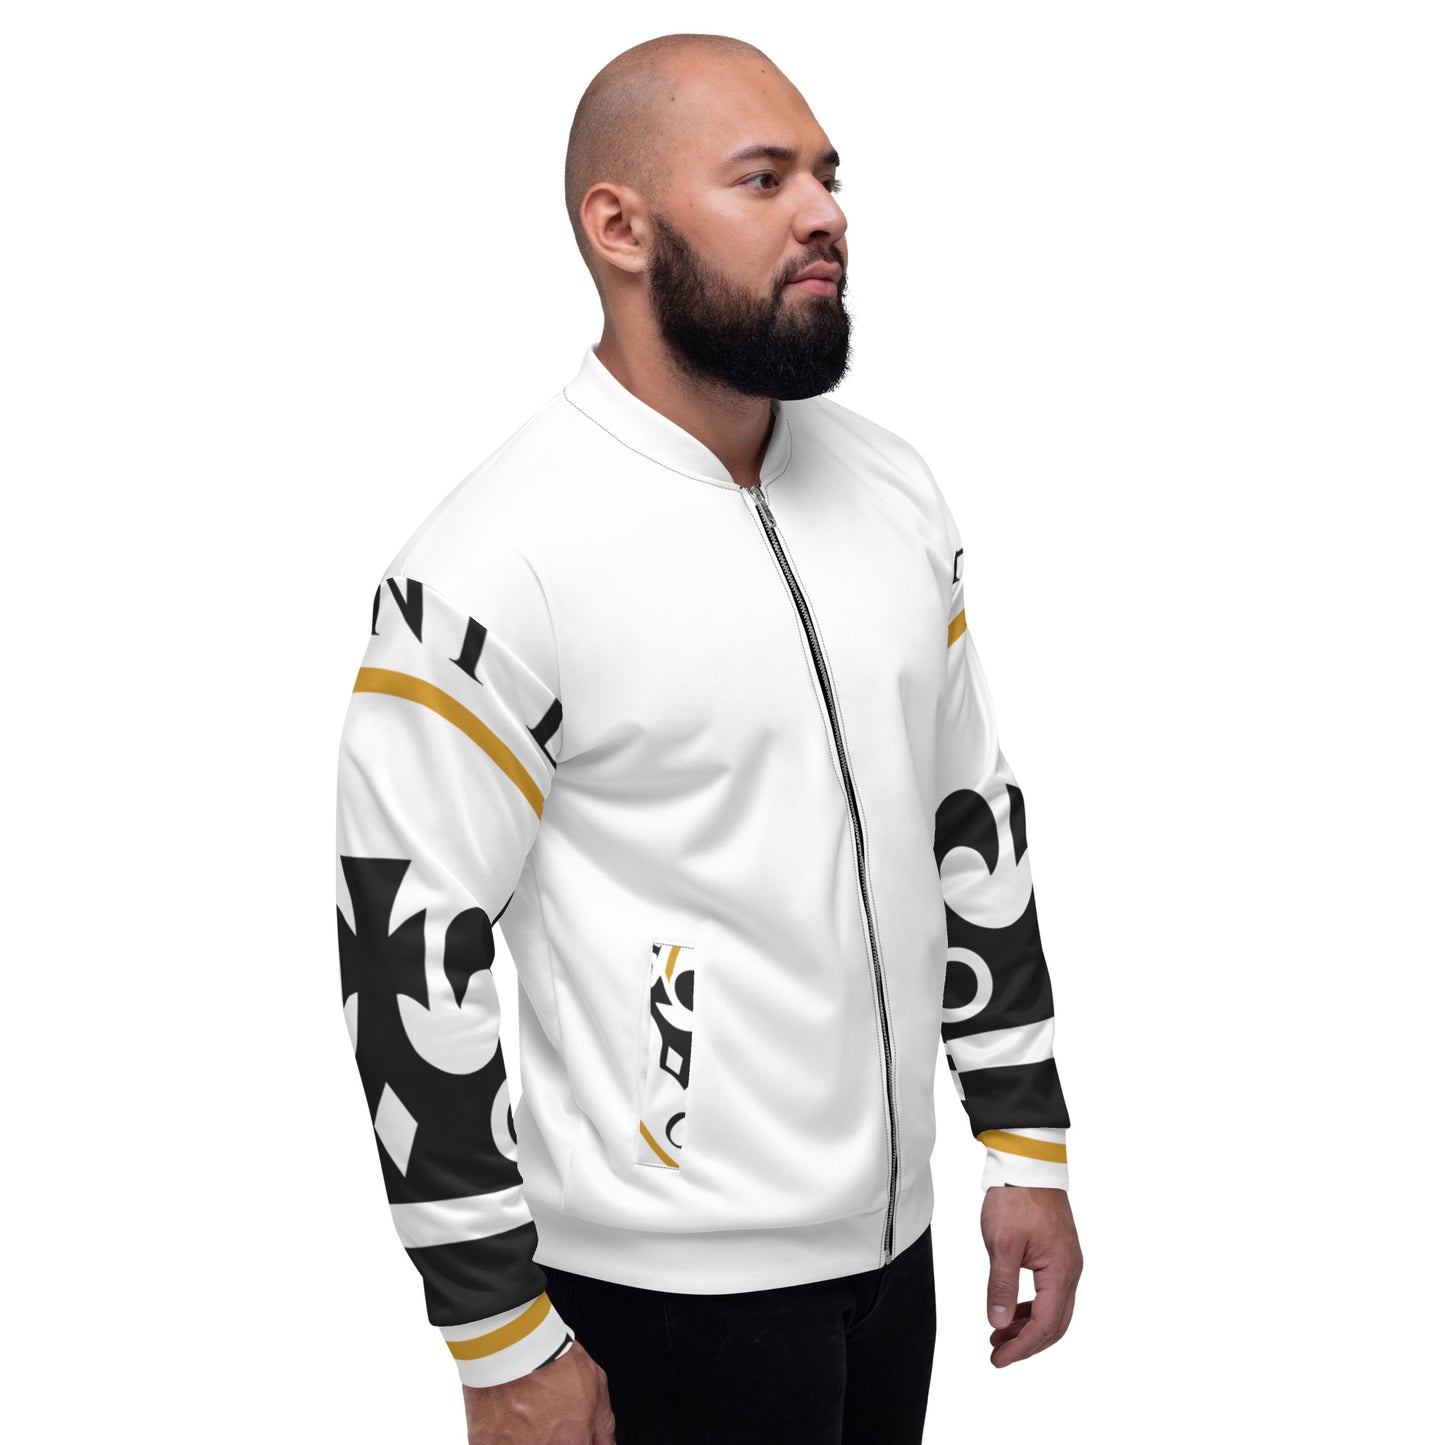 Black and Gold/ White Pageant Life Certified Unisex Bomber Jacket